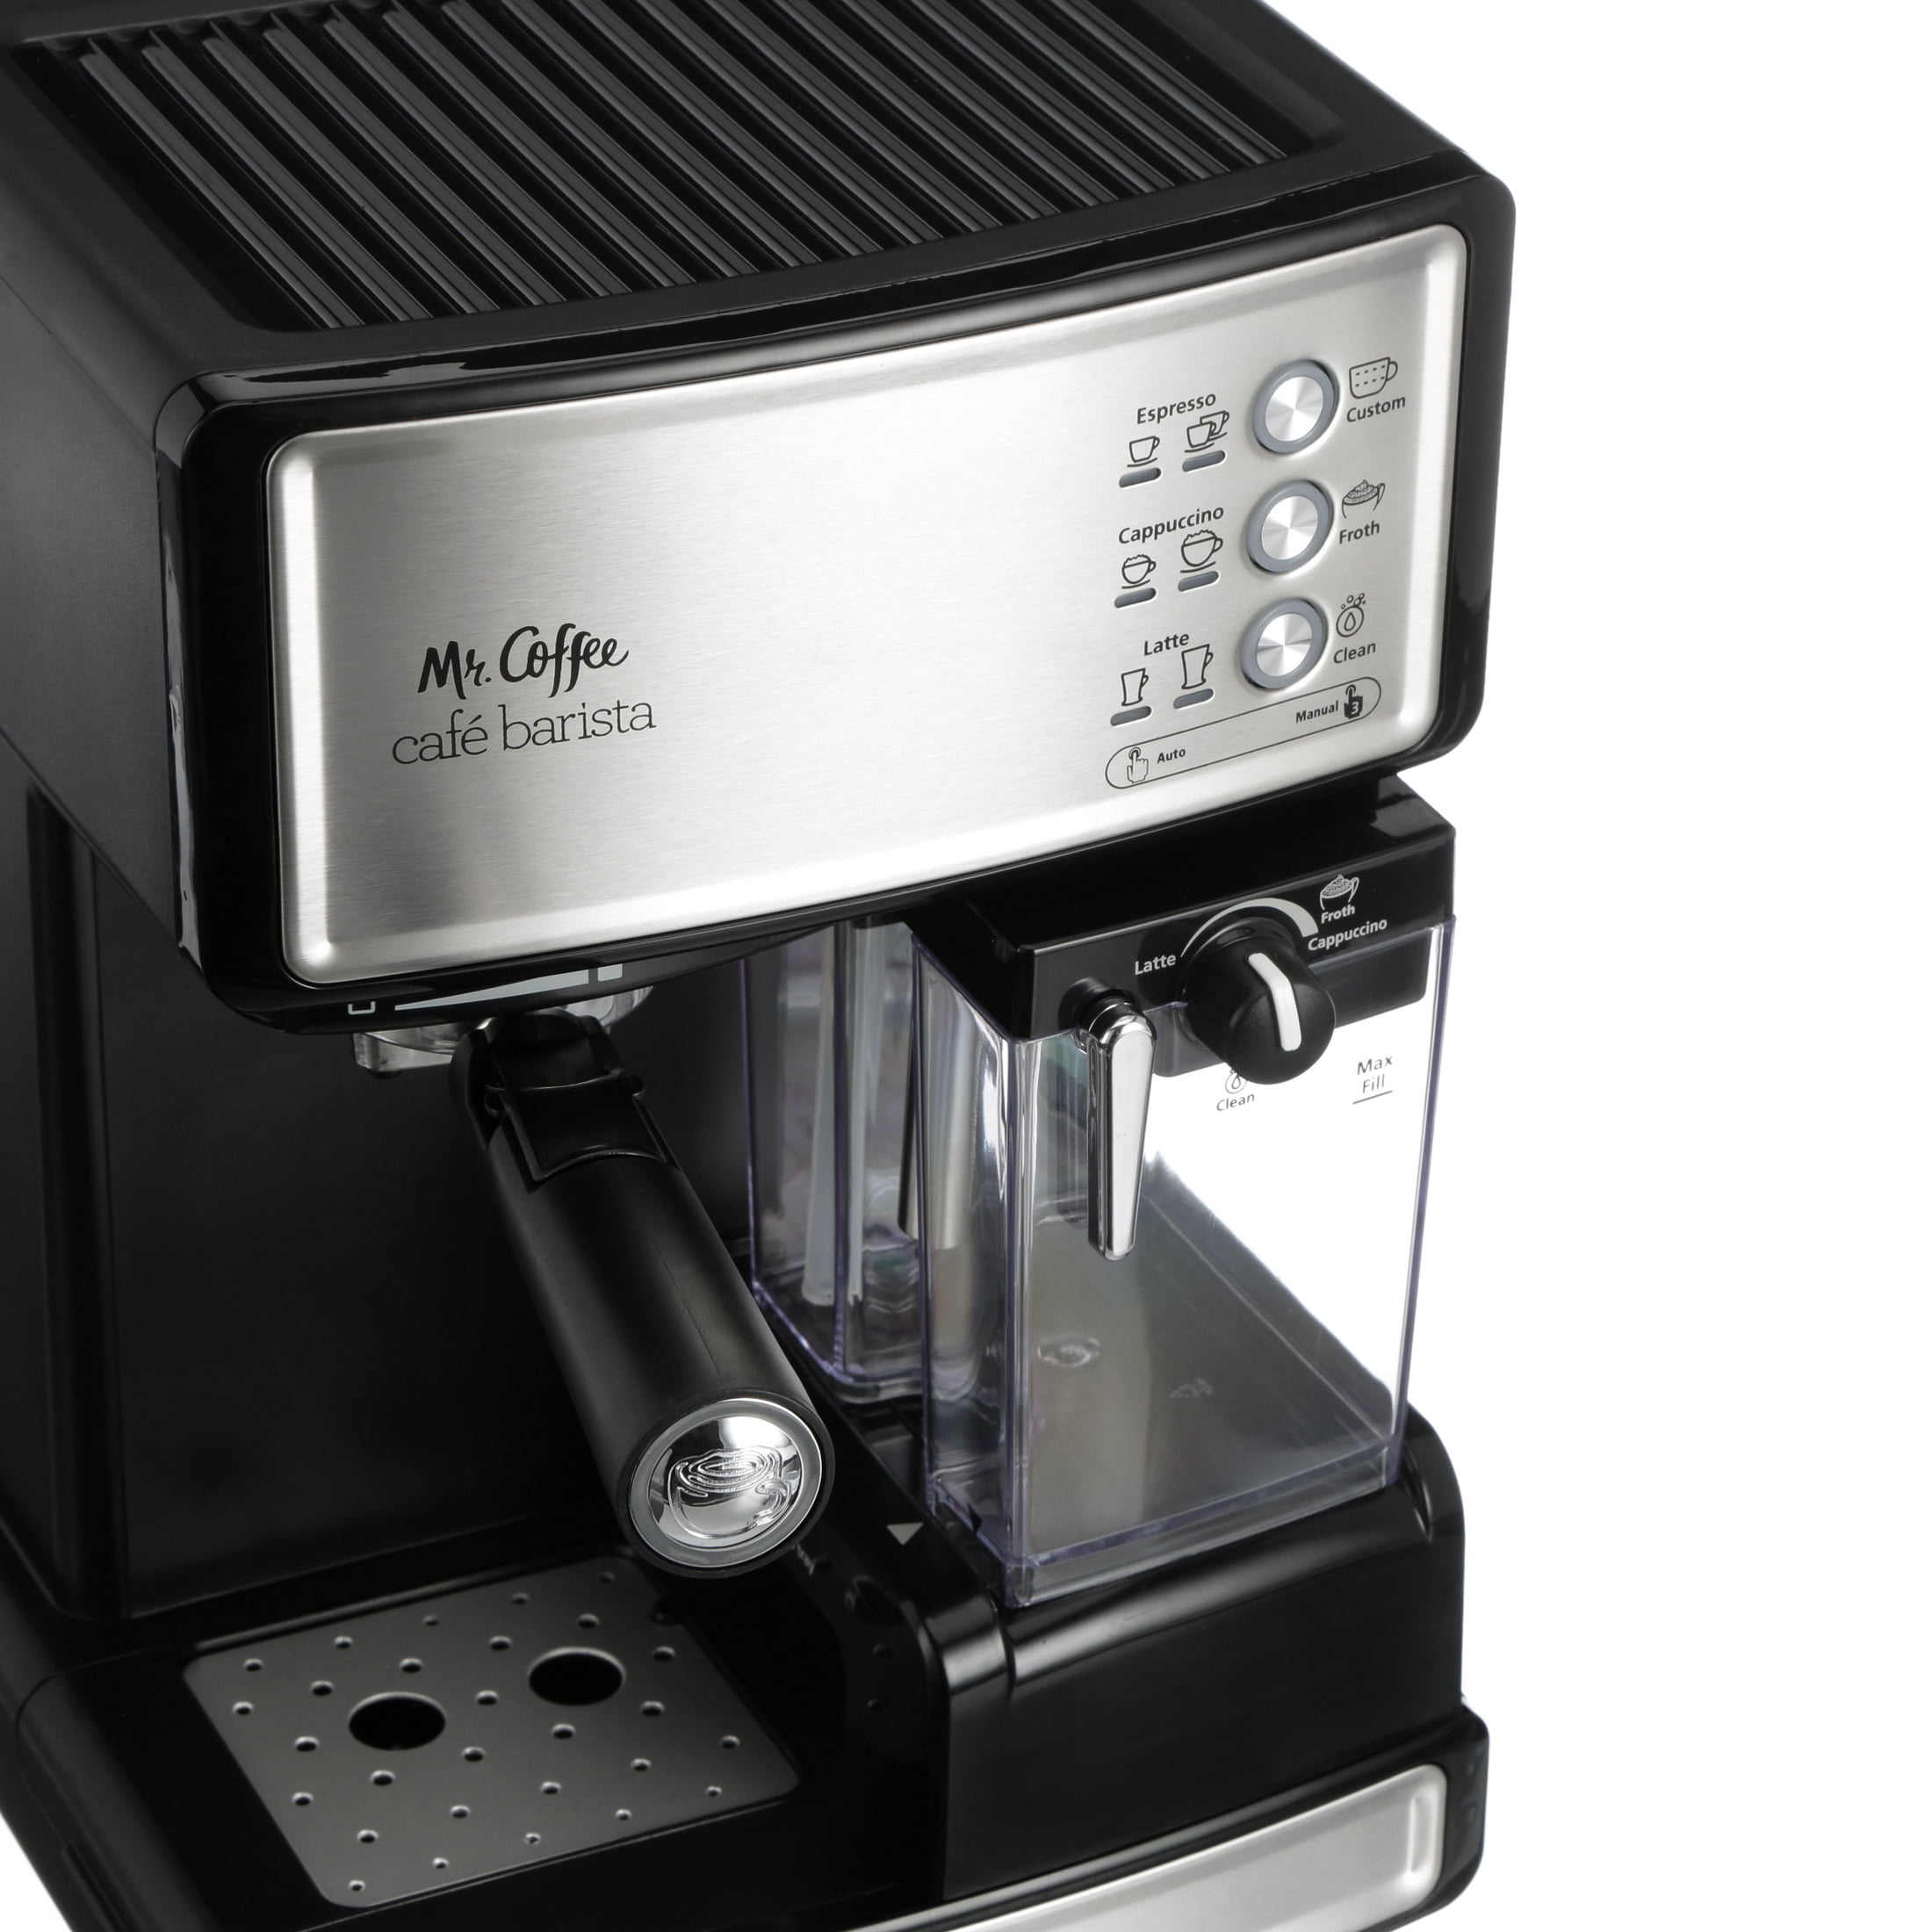 Mr. Coffee Cafe Barista - Shop Coffee Makers at H-E-B